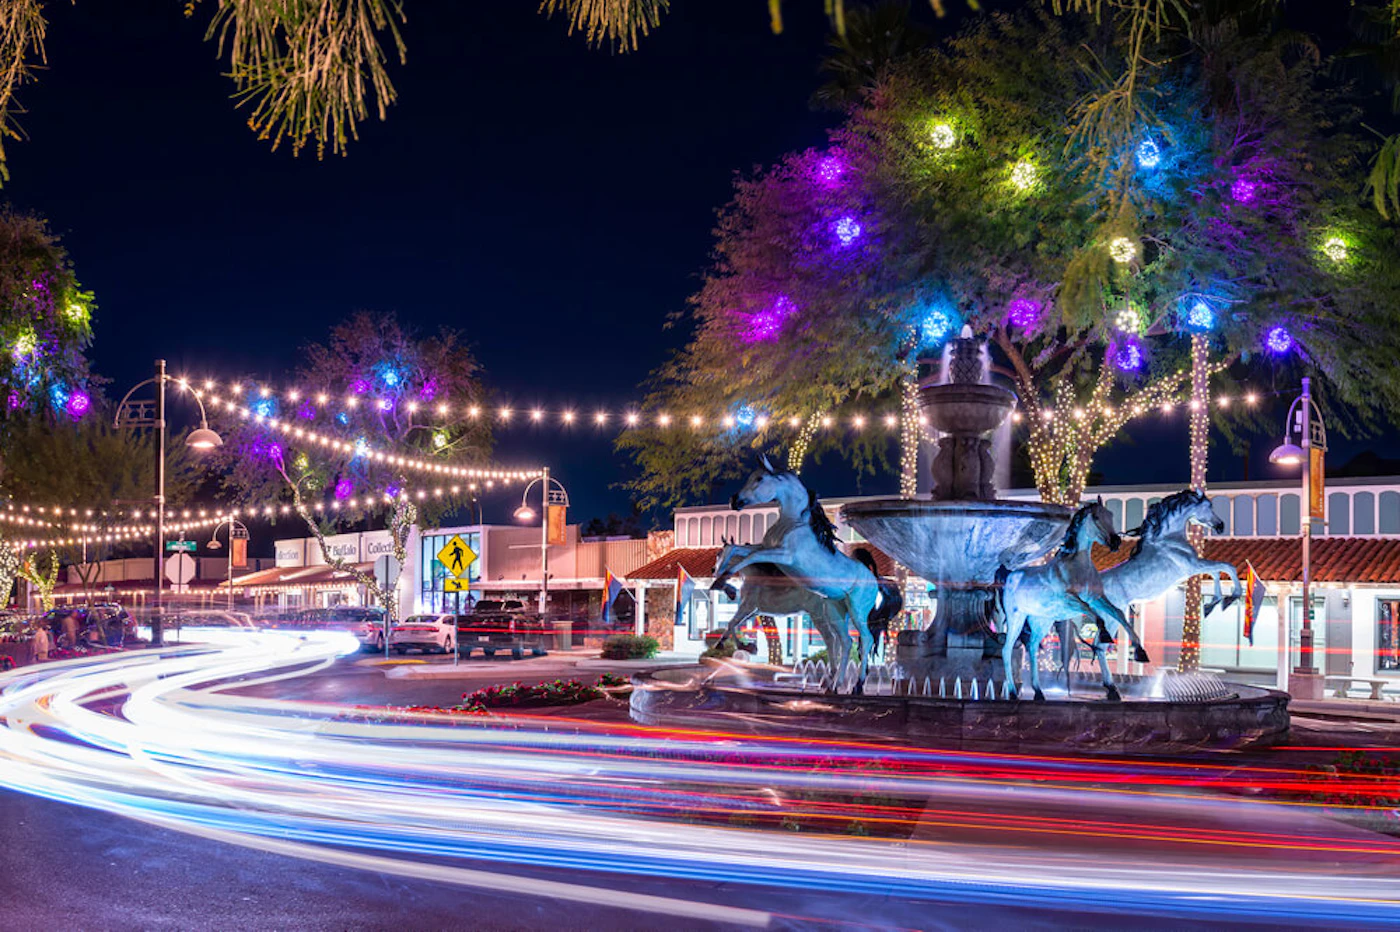 Scottsdale, AZ - February 9 2020: Traffic at night around Bob Parks' Bronze Horse Fountain in Old Town Scottsdale's 5th Avenue Shopping district. (Shutterstock Photo/kenelamb photographics)